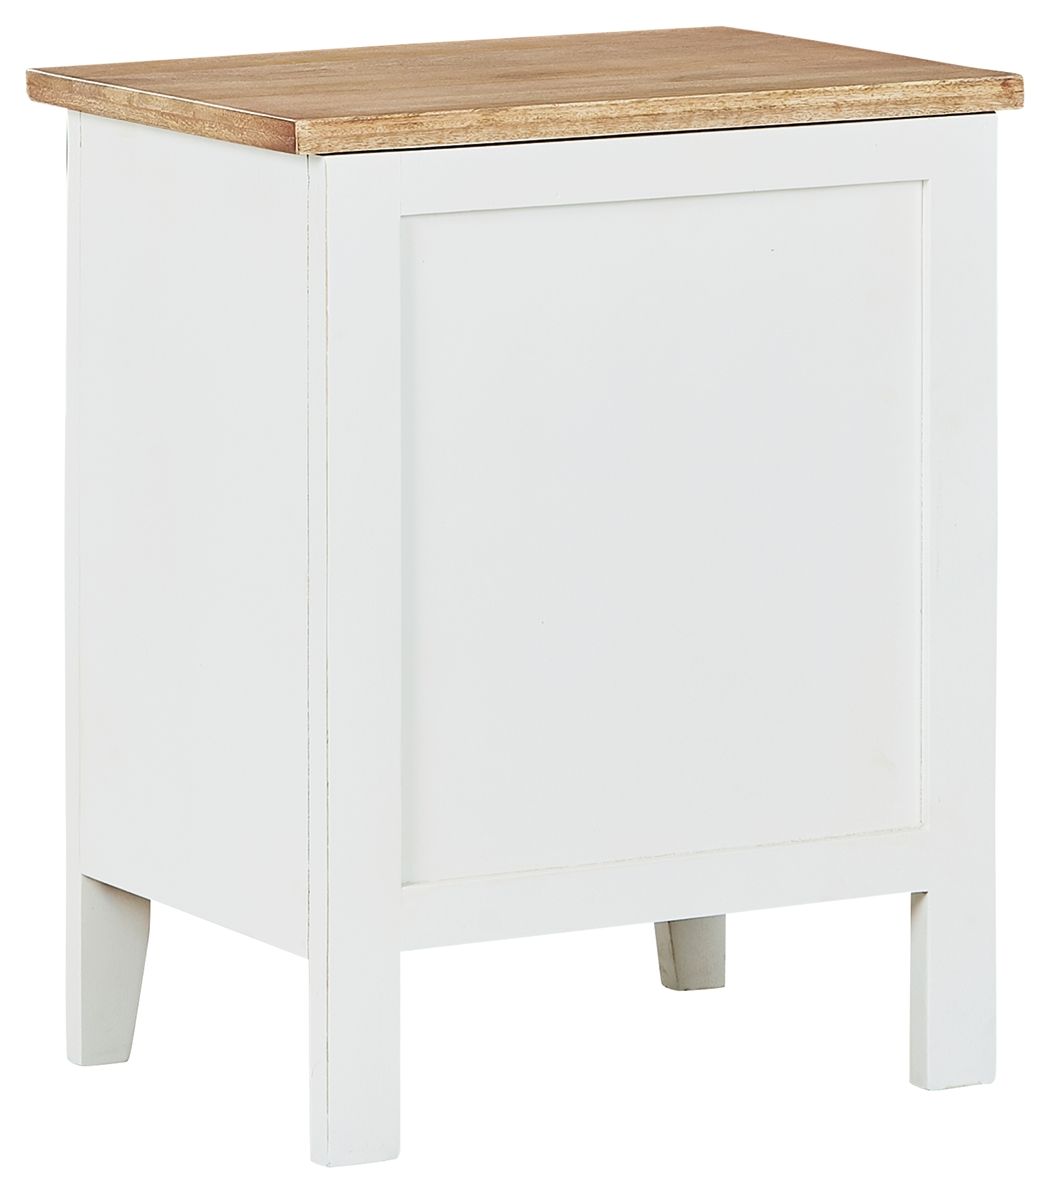 Gylesburg - White / Brown - Accent Cabinet - Tony's Home Furnishings